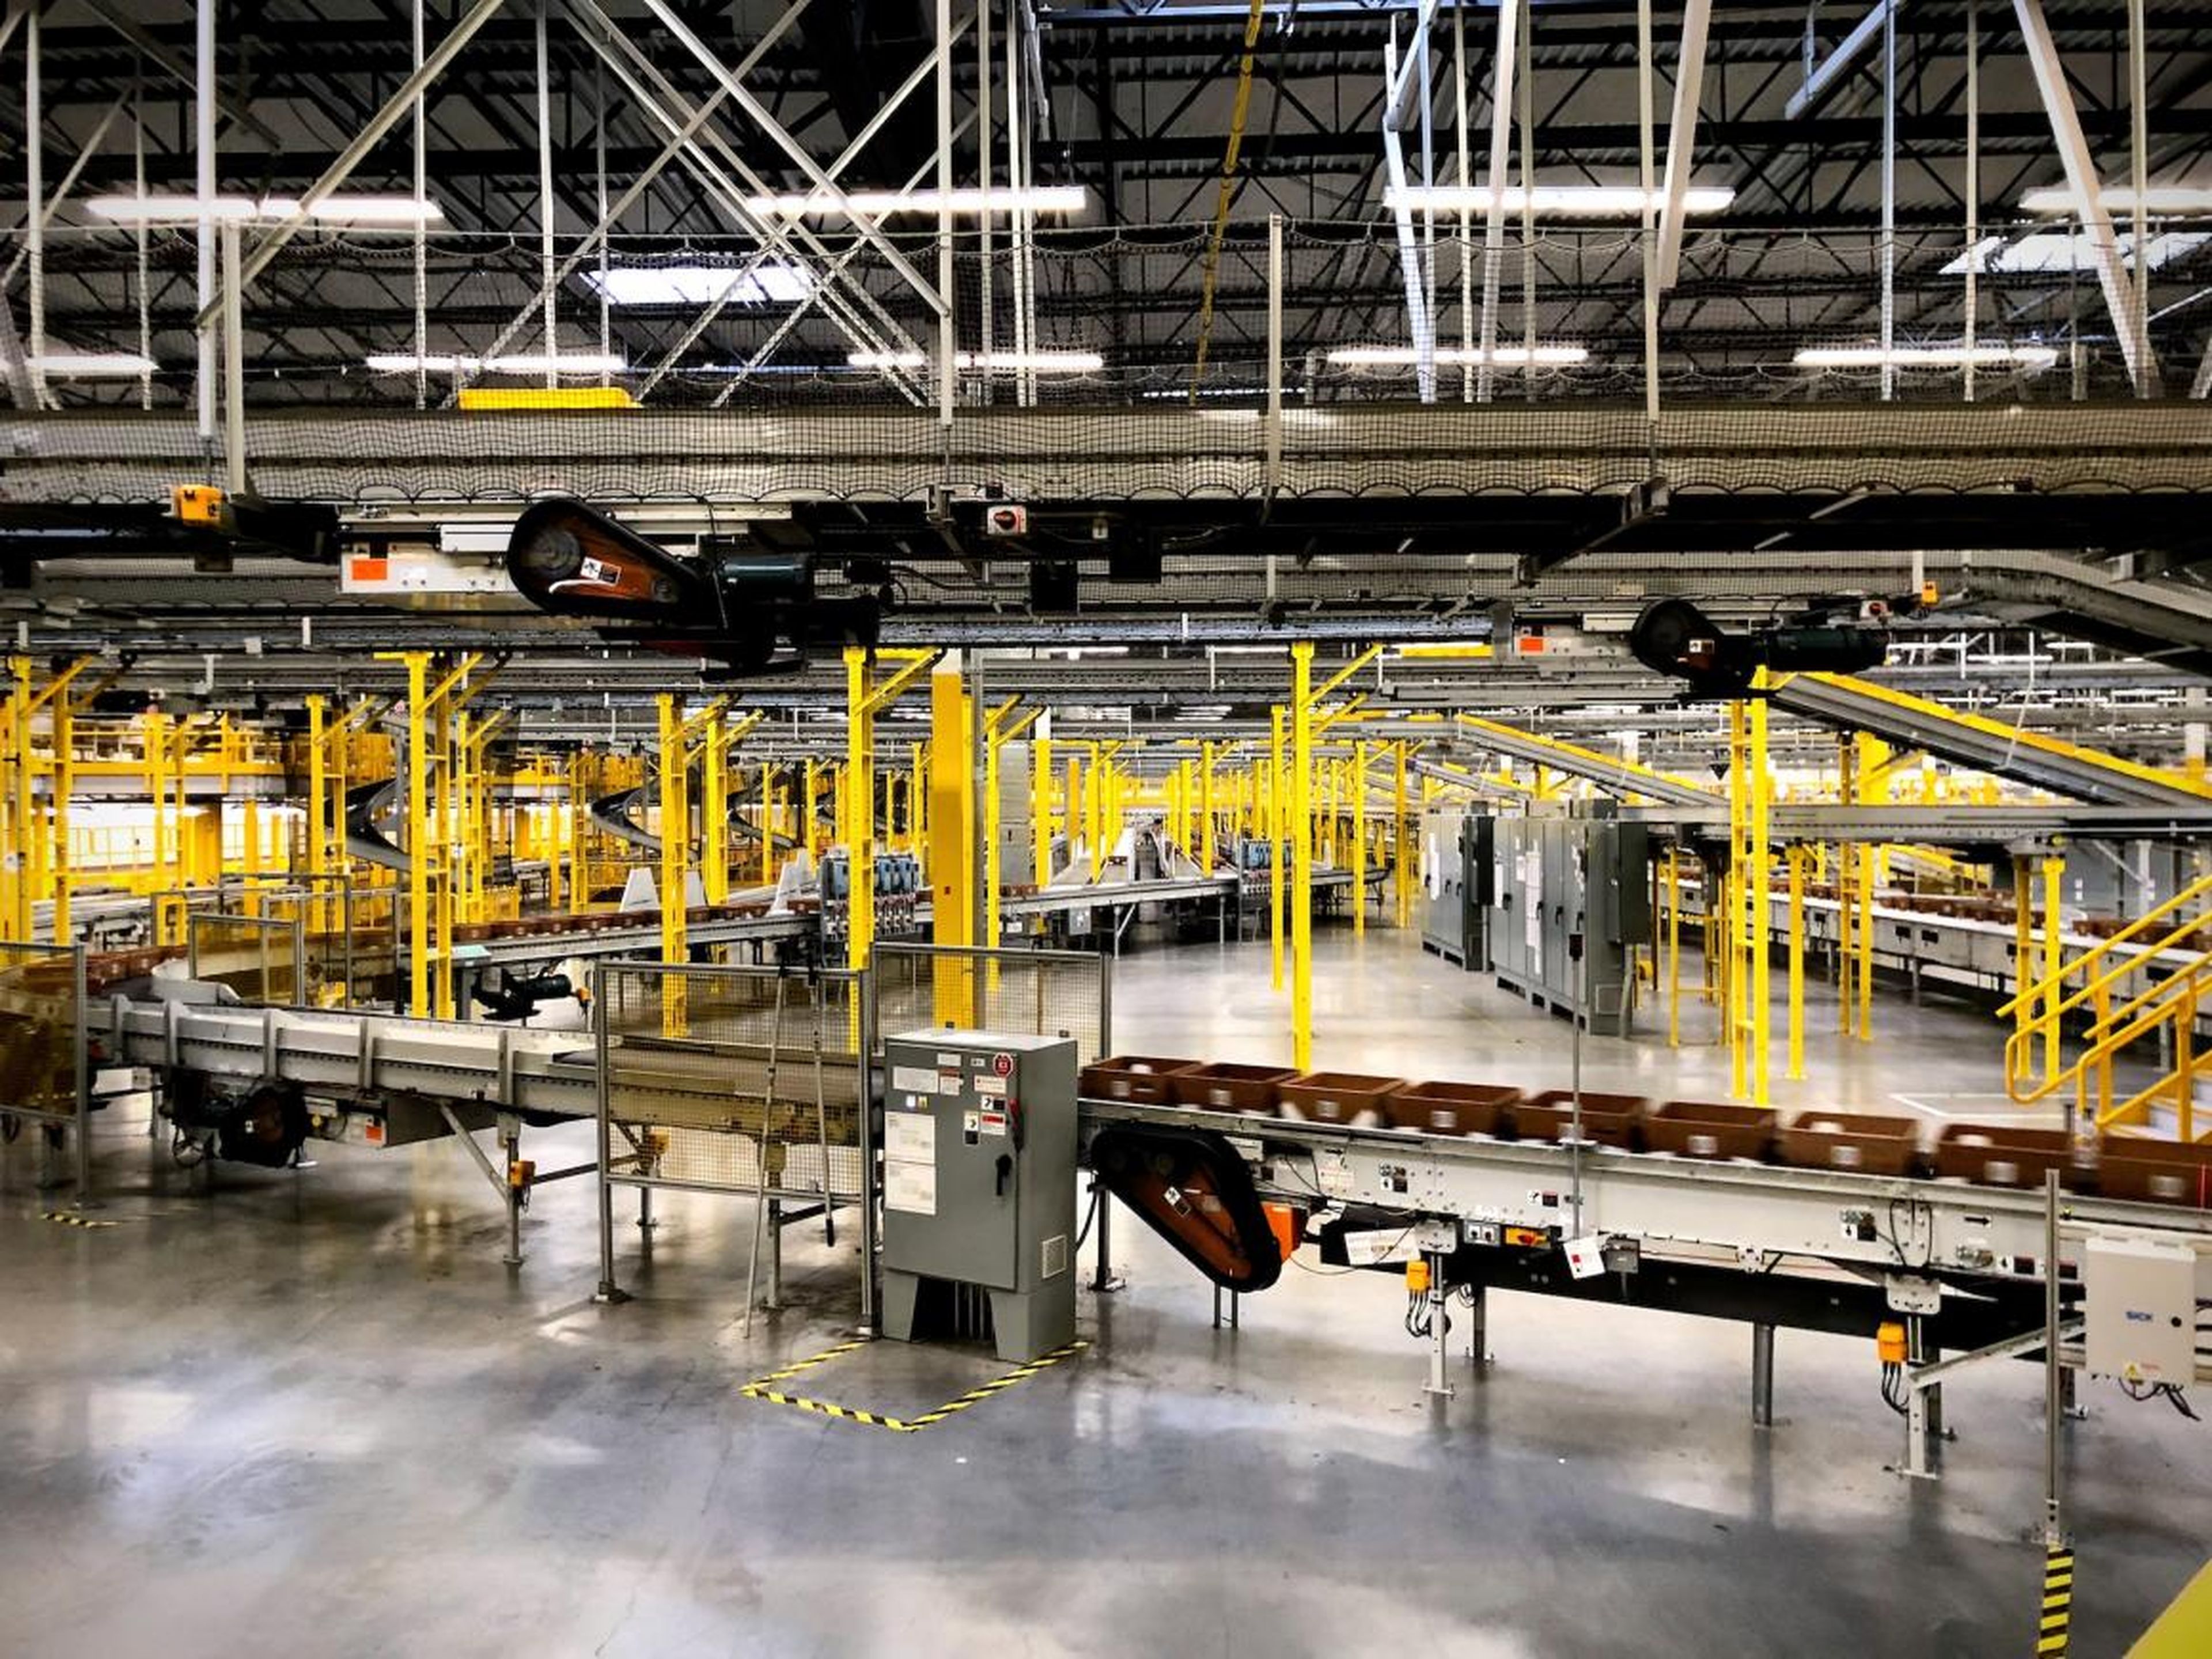 The Kent fulfillment center runs 22 hours a day, 363 days a year.